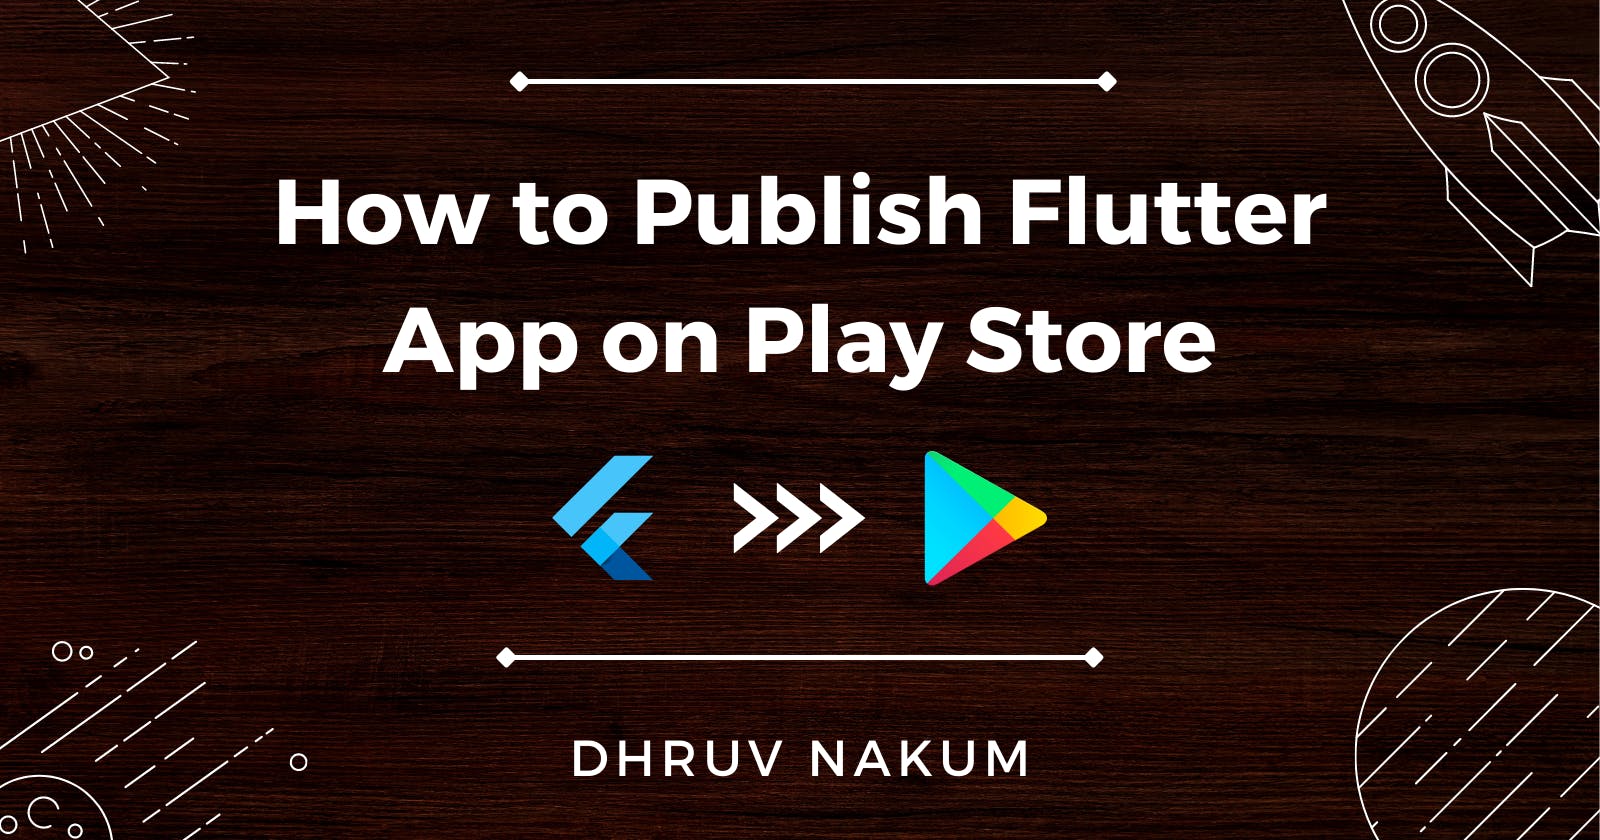 How to Publish Flutter App on Play Store